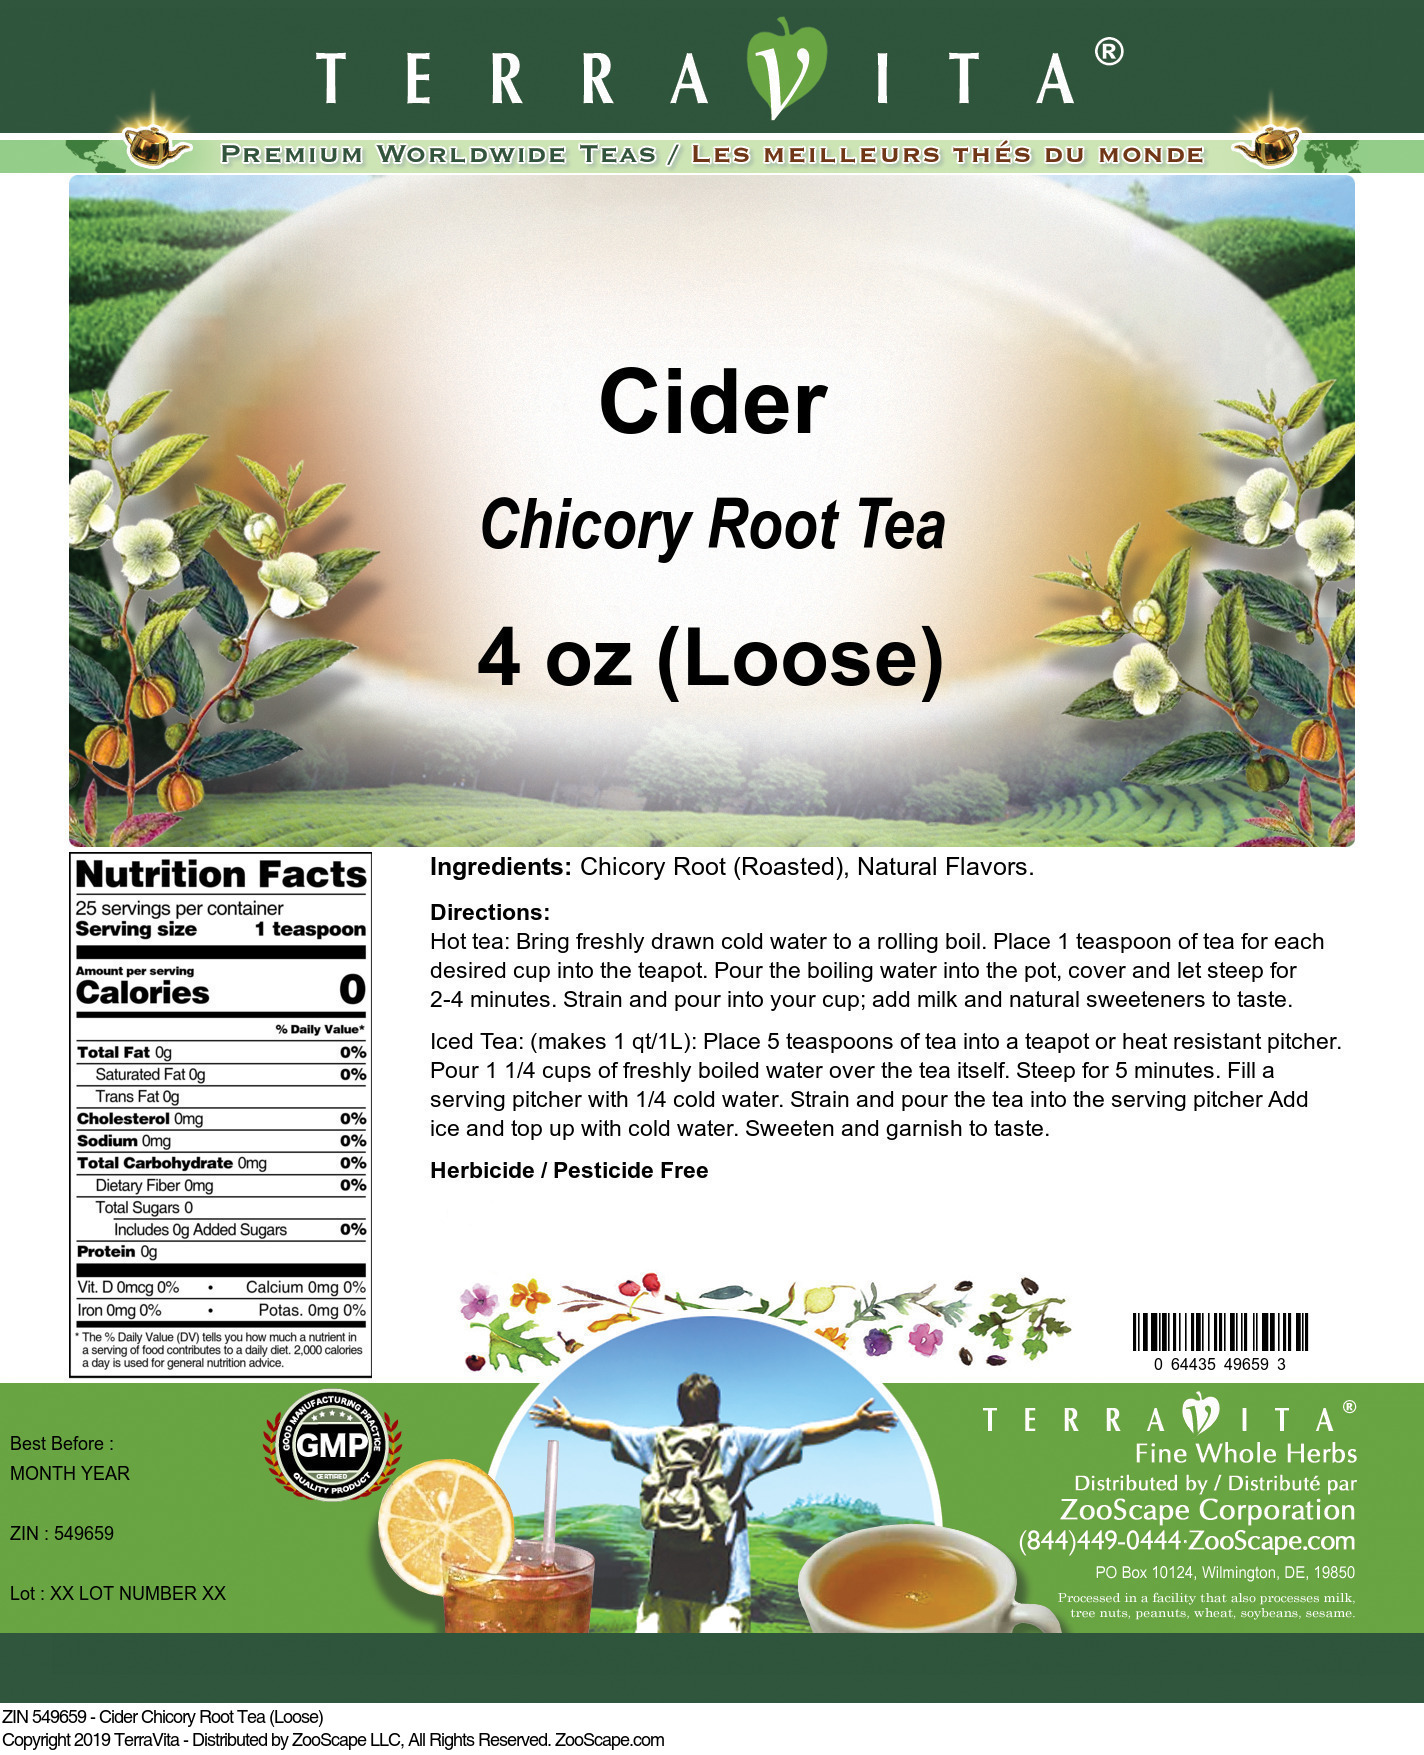 Cider Chicory Root Tea (Loose) - Label